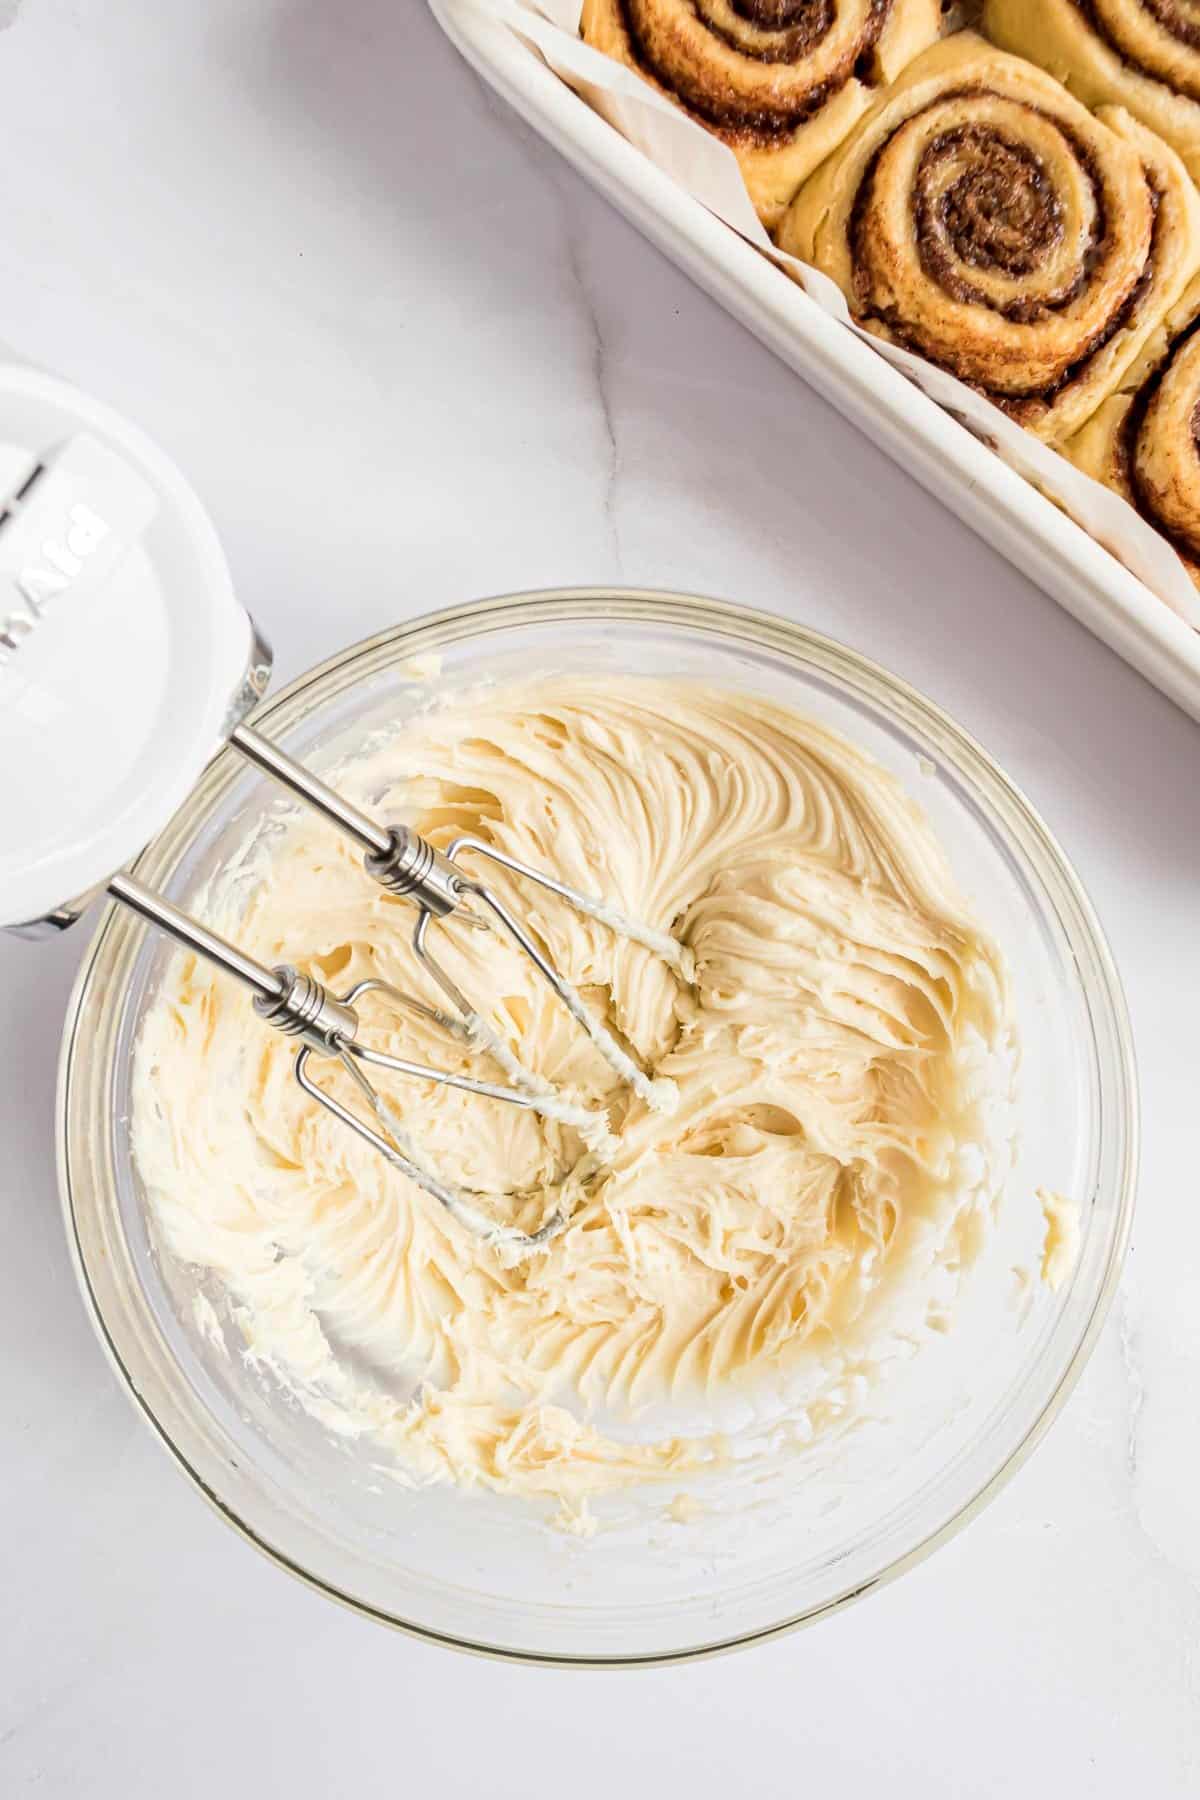 Cream cheese icing in a mixing bowl.